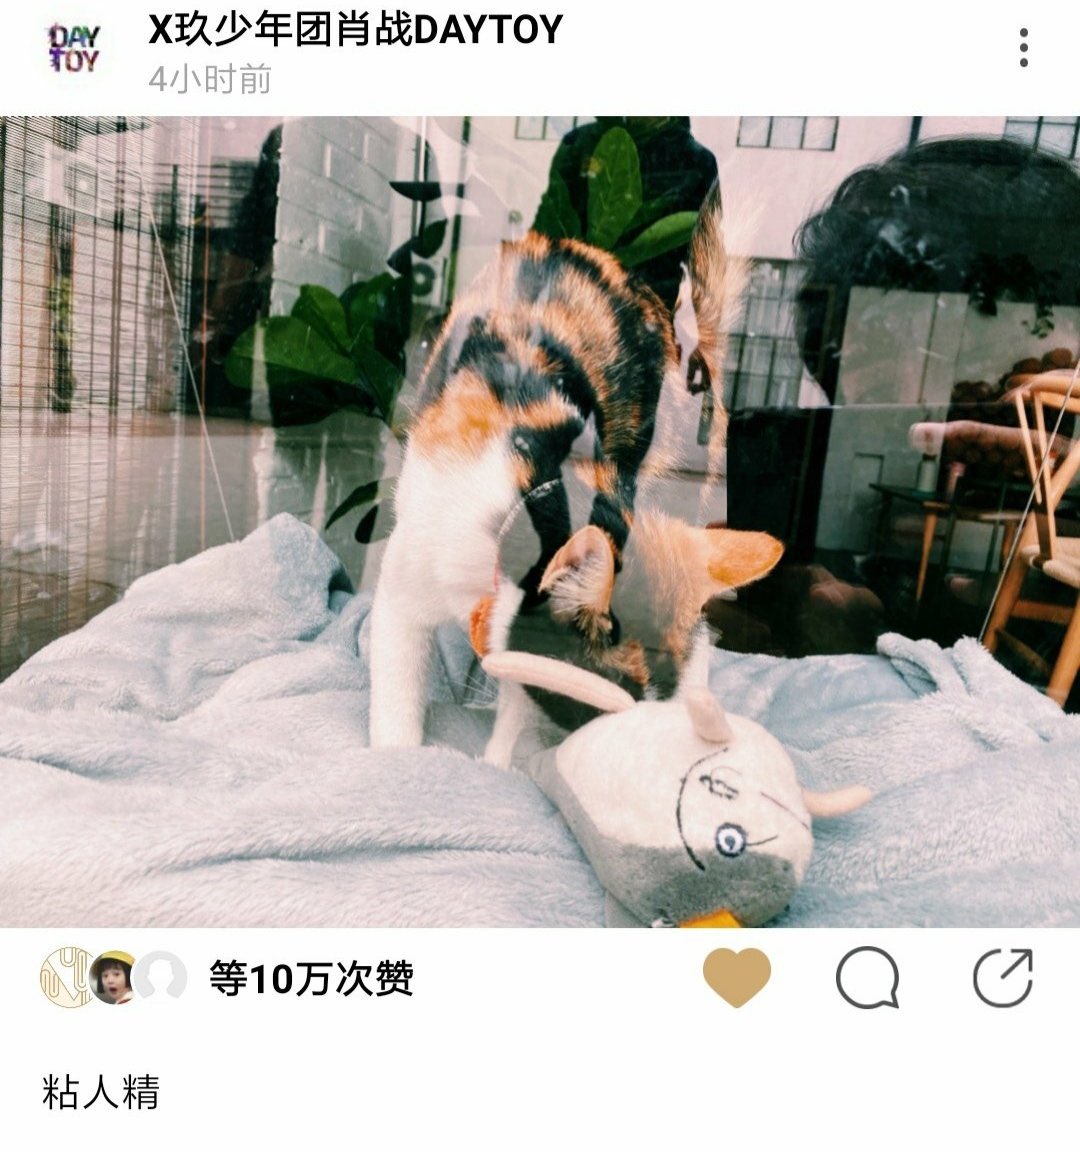 he spots a cat through a shop window and immediately takes a picture!